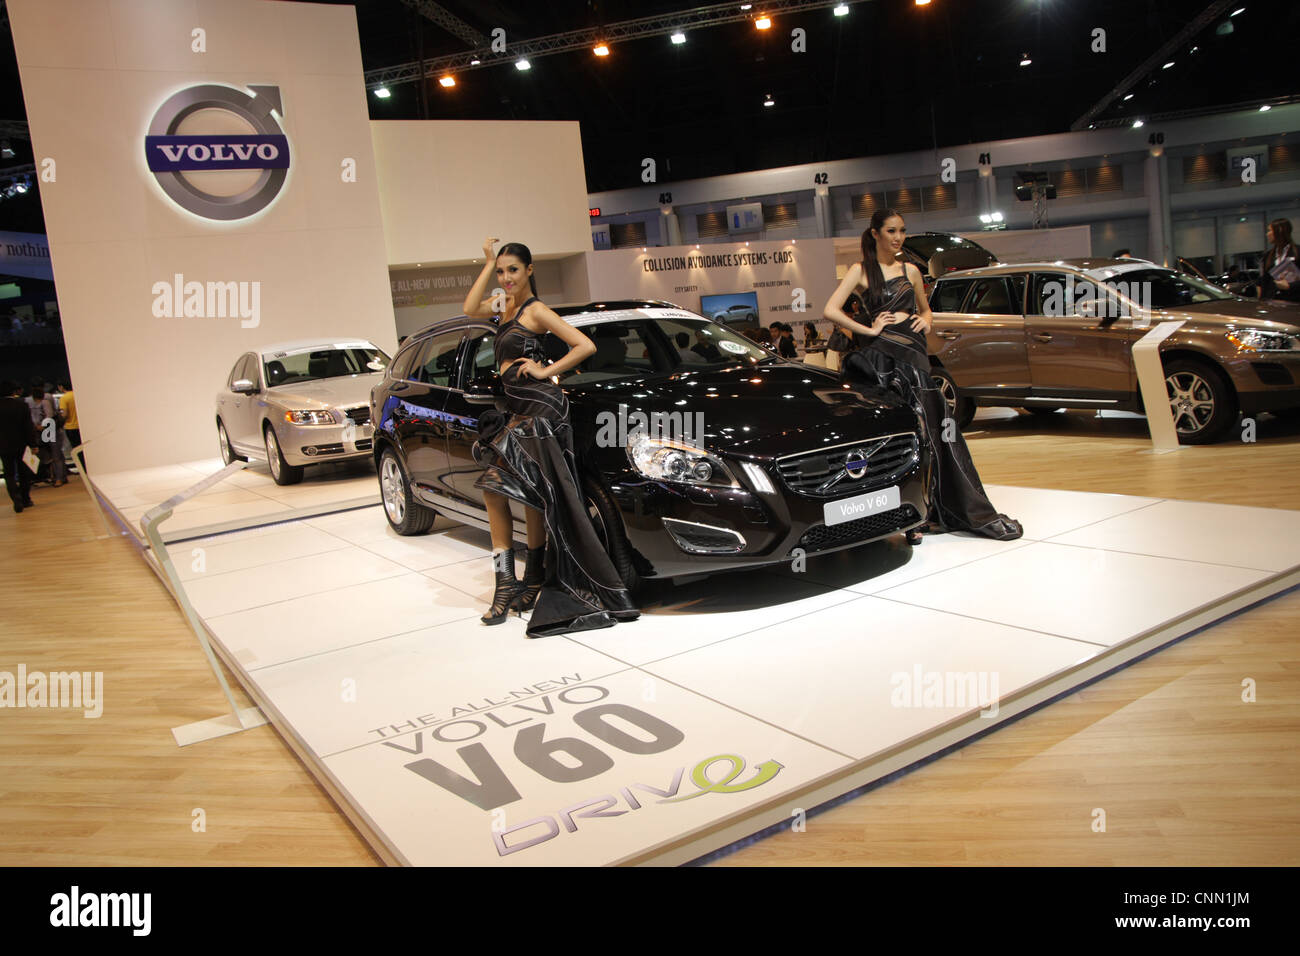 Presenters posing with Volvo car at Thailand Motor Show 2012 Stock Photo